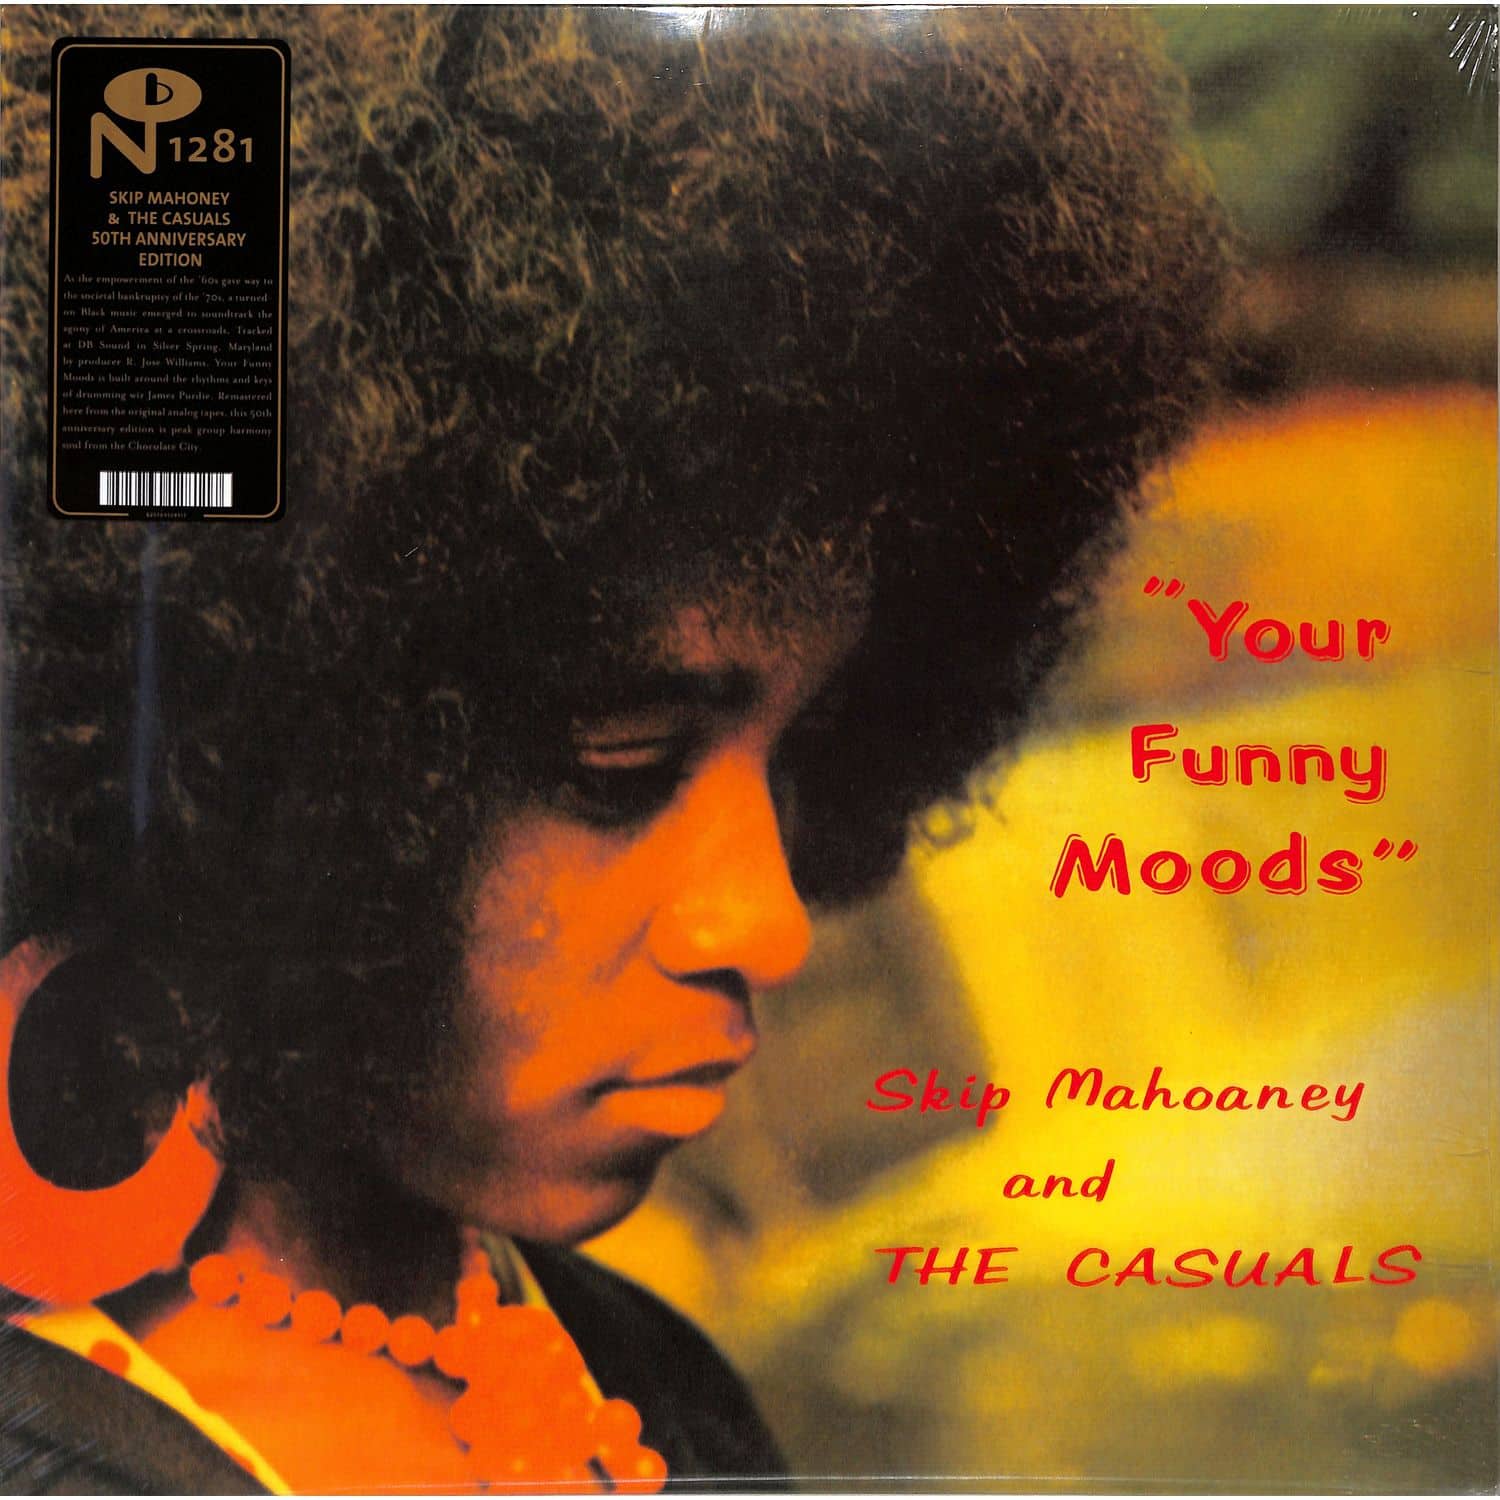 Skip Mahoaney & The Casuals - YOUR FUNNY MOODS 